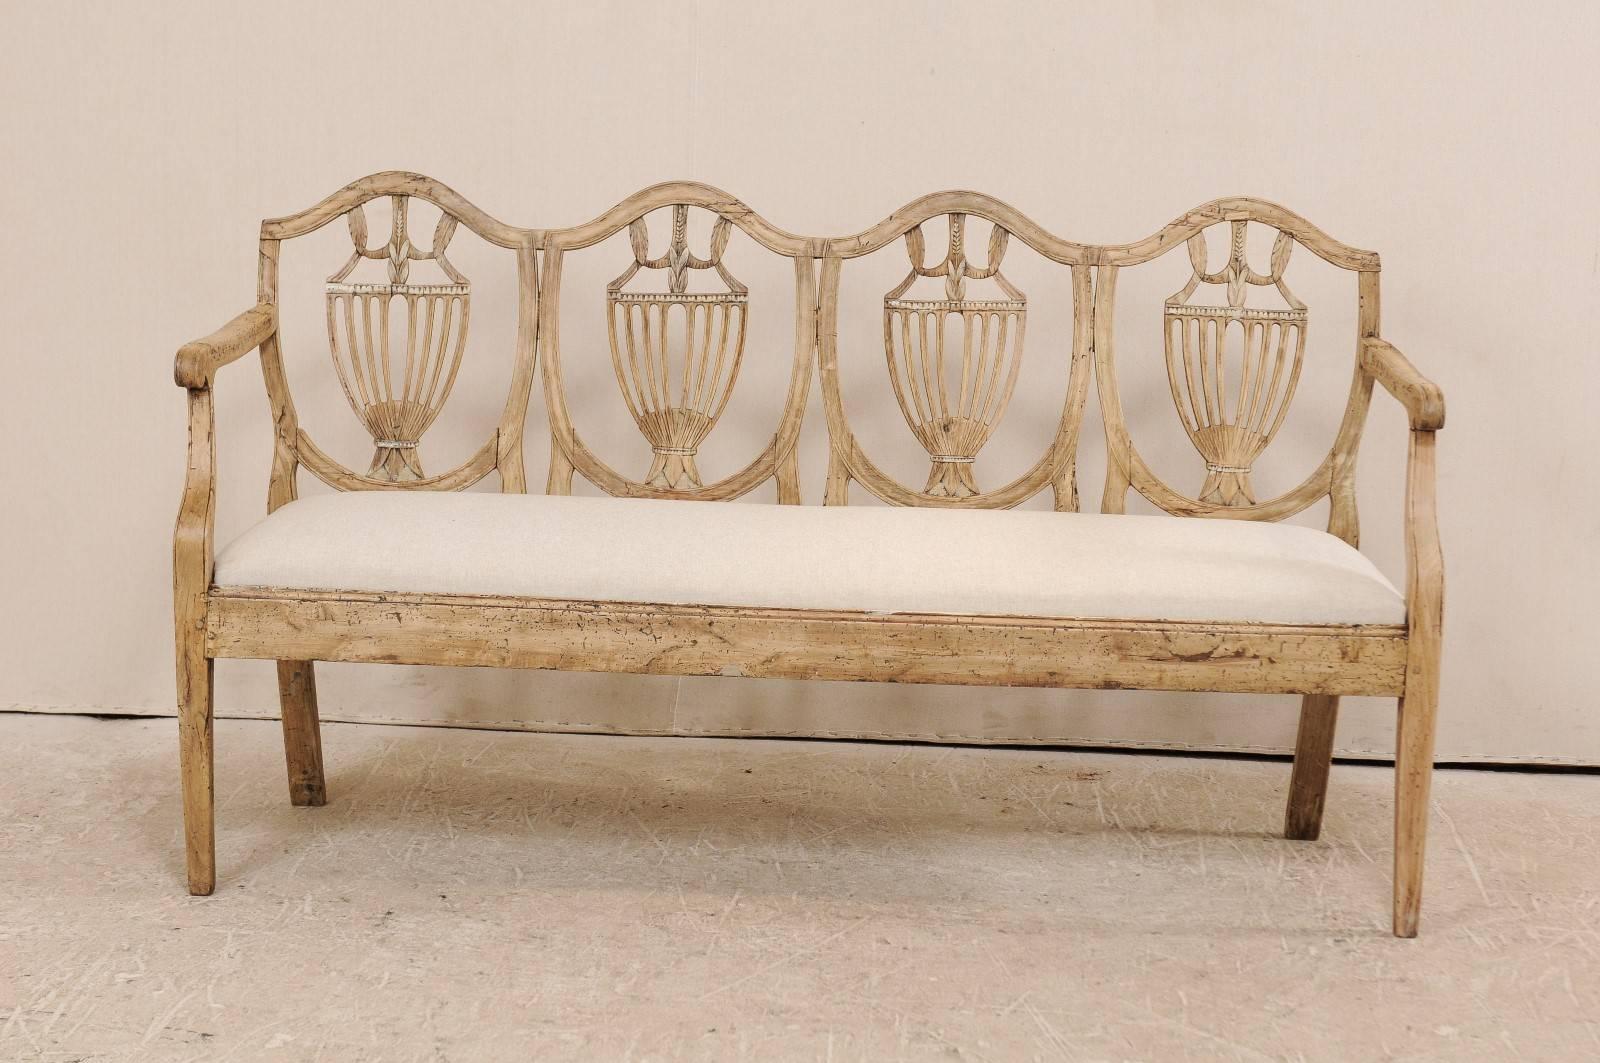 An 18th century Italian carved wood sofa bench. This antique Italian four-seat settee features a exquisitely carved pierced splat backs with a fluid top rail that rises and falls, giving definition to each seat. The sofa has a plain skirt, carved